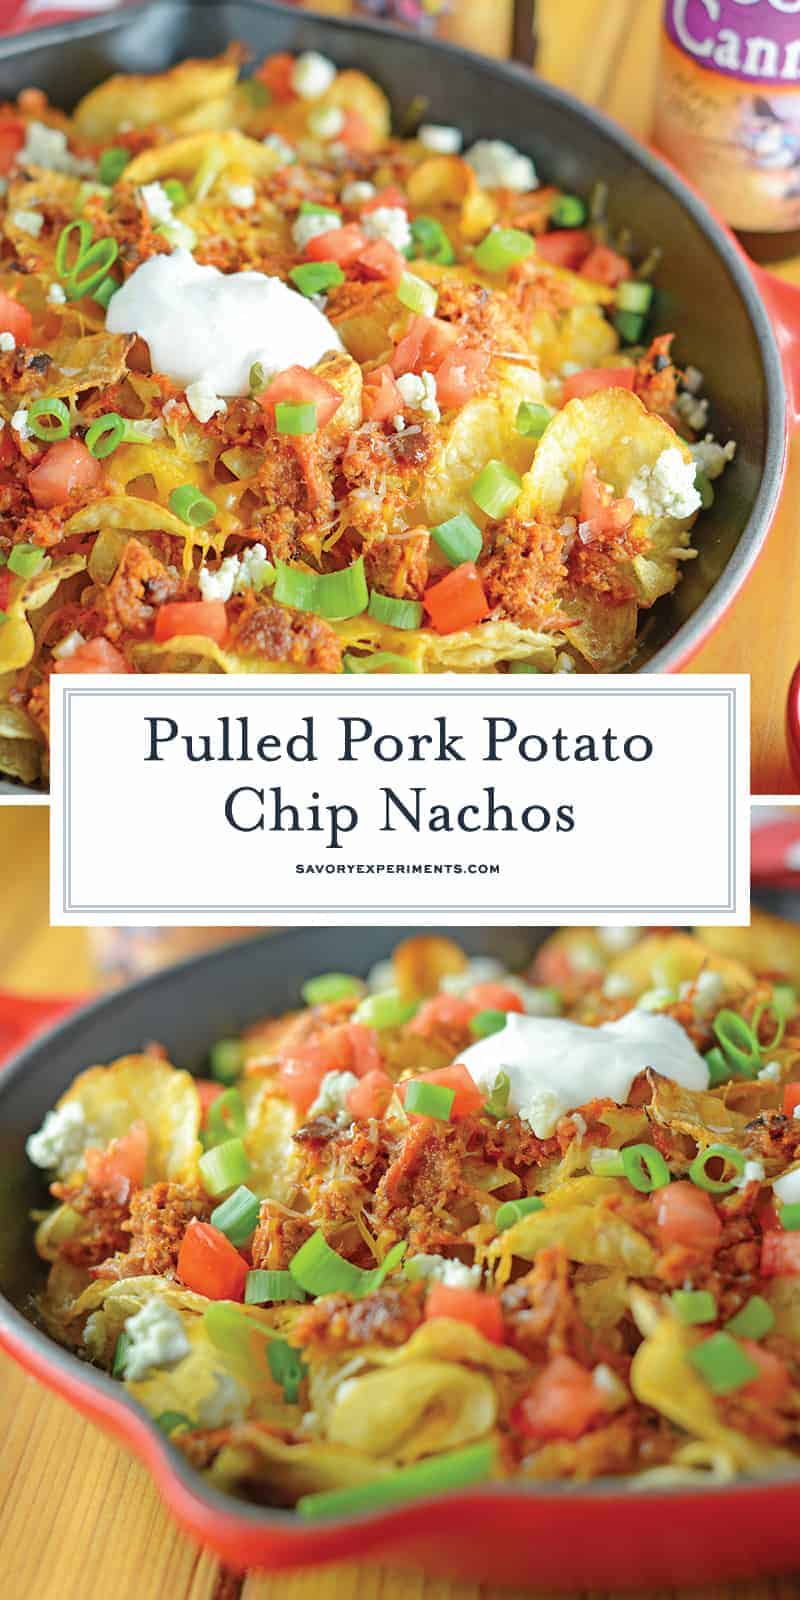 Pulled Pork Potato Chip Nachos are an easy appetizer or meal that your whole family will love made with kettle cooked potato chips and zesty pulled pork! #nachorecipes #pulledpork www.savoryexperiments.com 